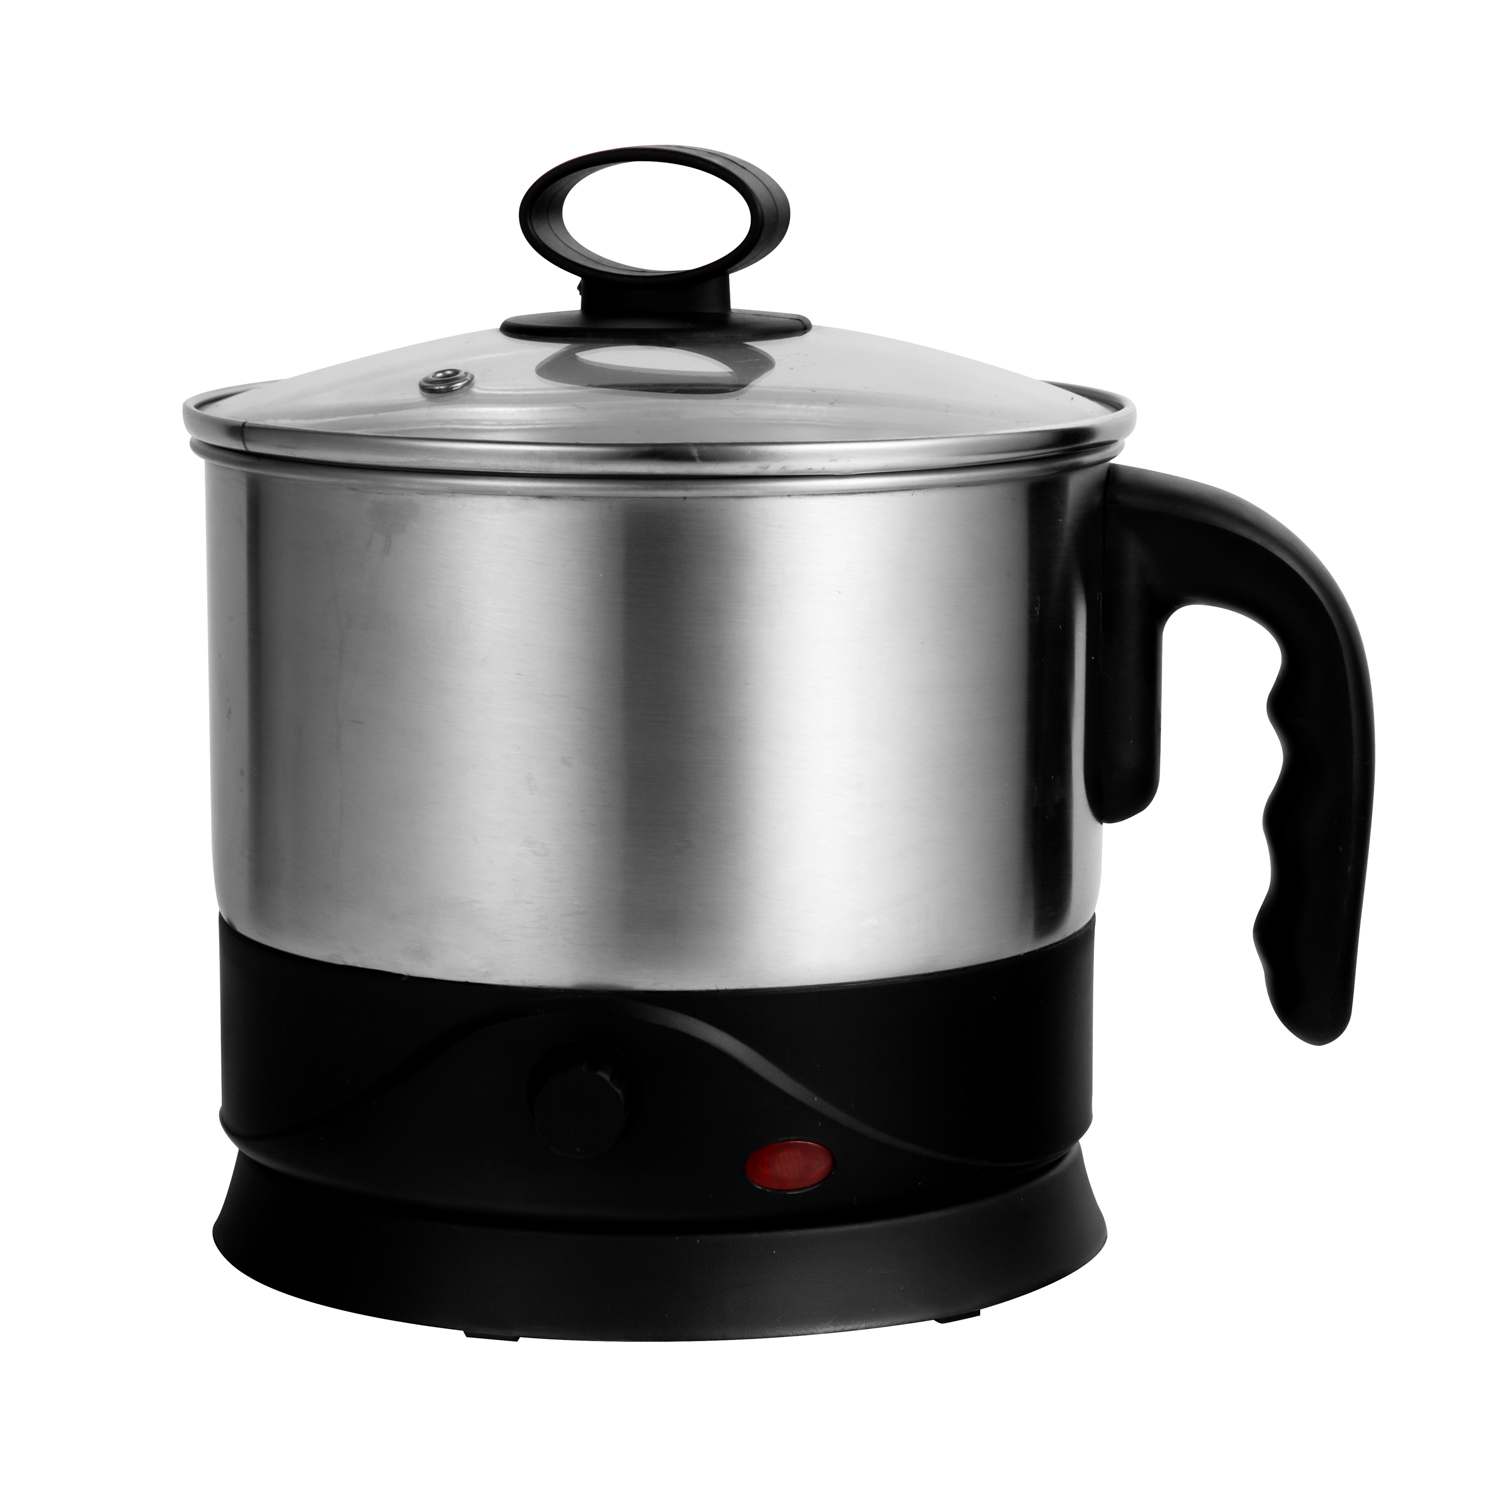 Functions of Electric Kettle